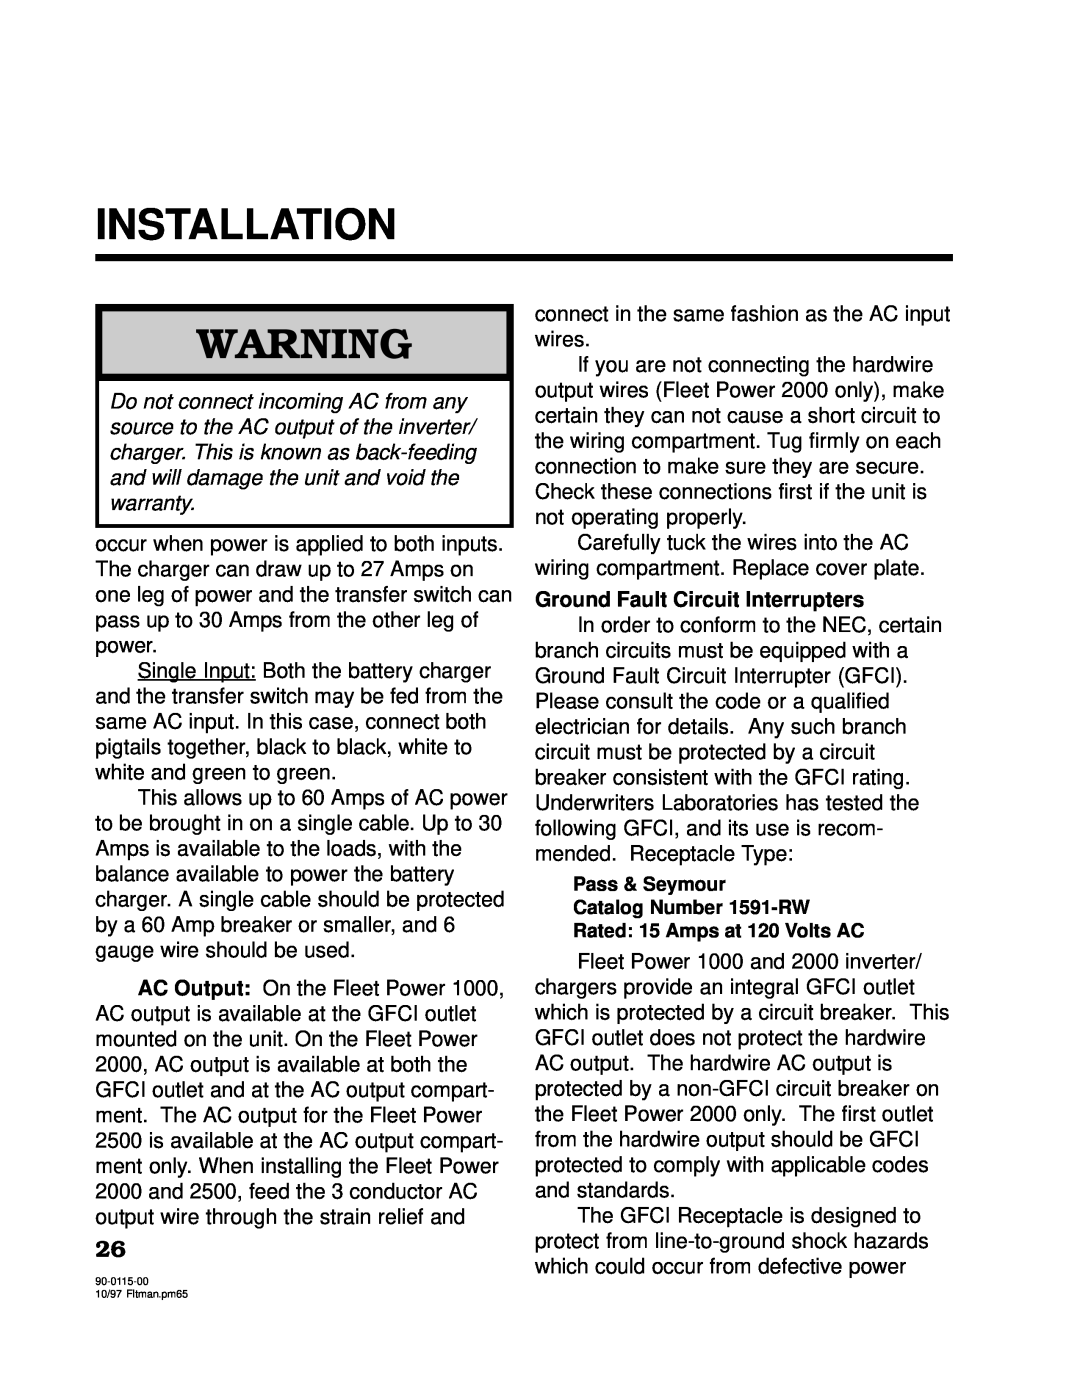 Xantrex Technology 2500, 2000 owner manual Installation, Ground Fault Circuit Interrupters 